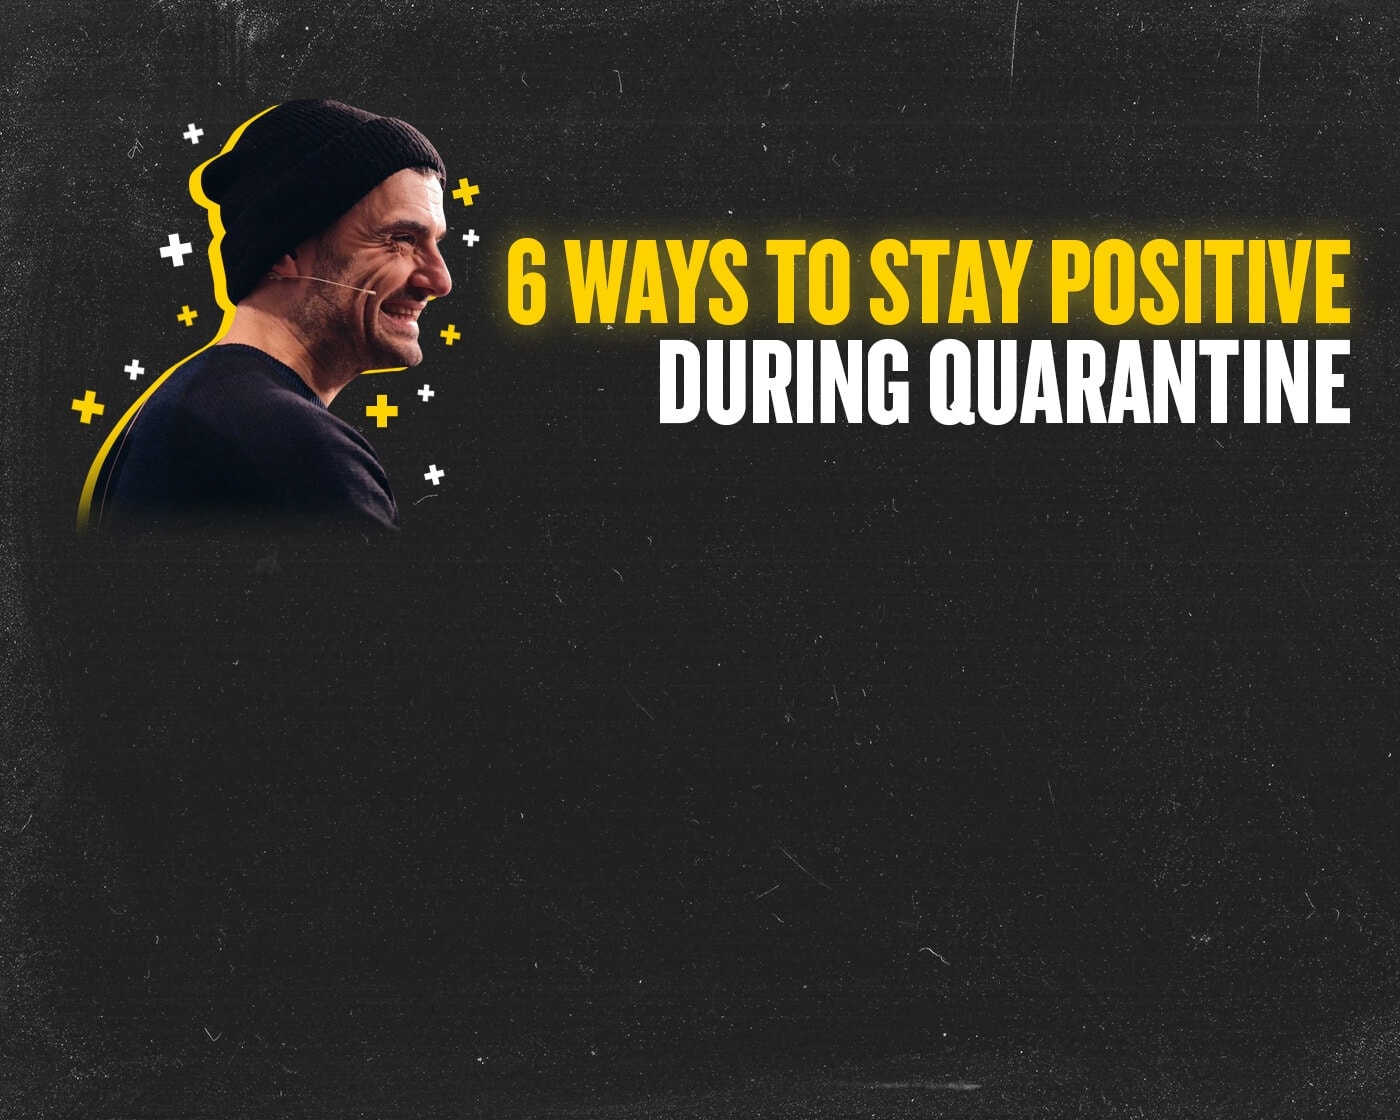 6 Ways To Stay Positive During Quarantine